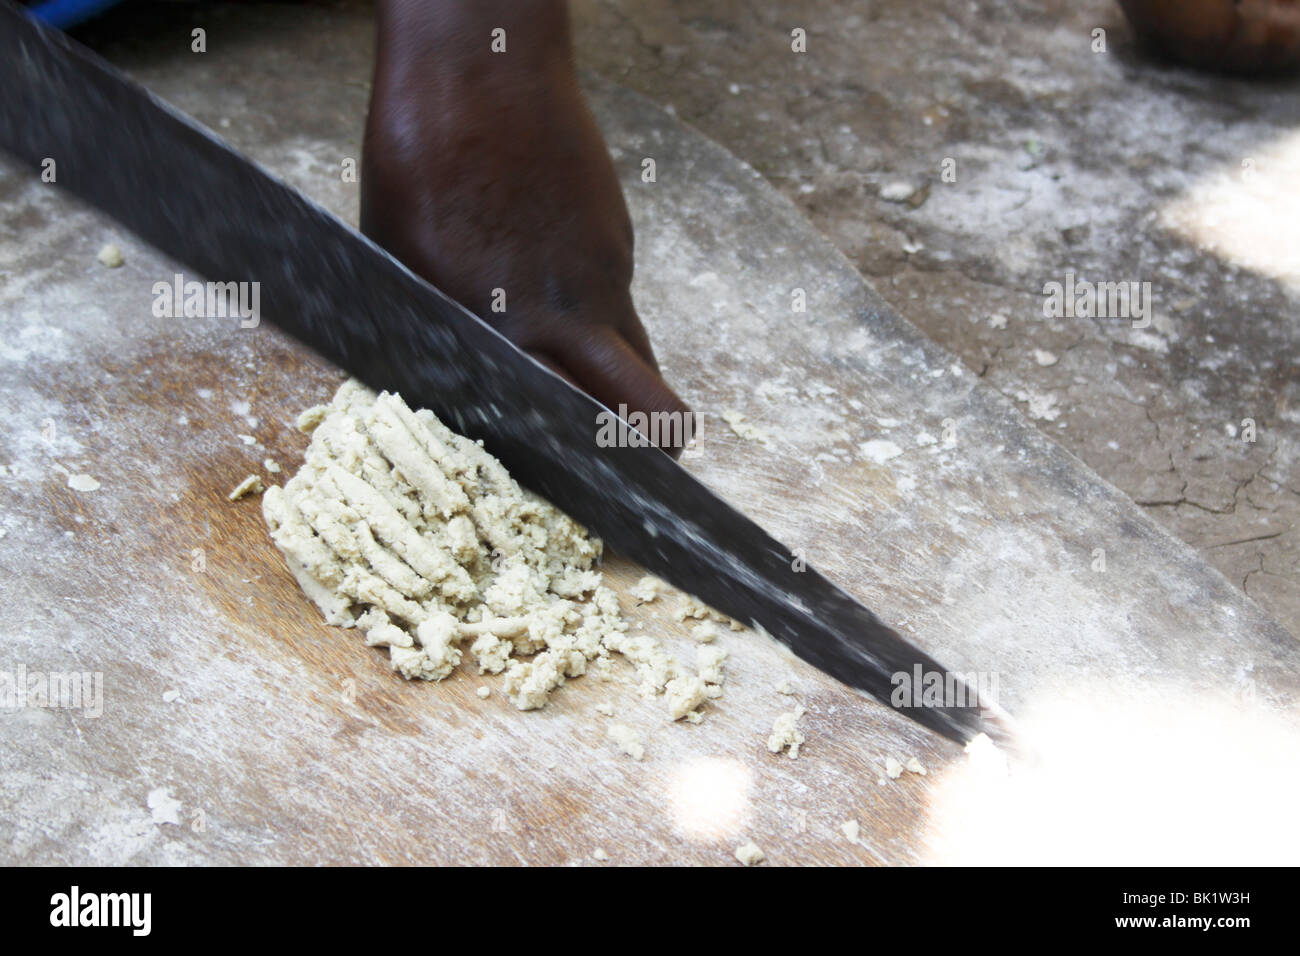 Dorze village. Woman prepares bread from the shaving a leaf of the fruitless Banana. Stock Photo